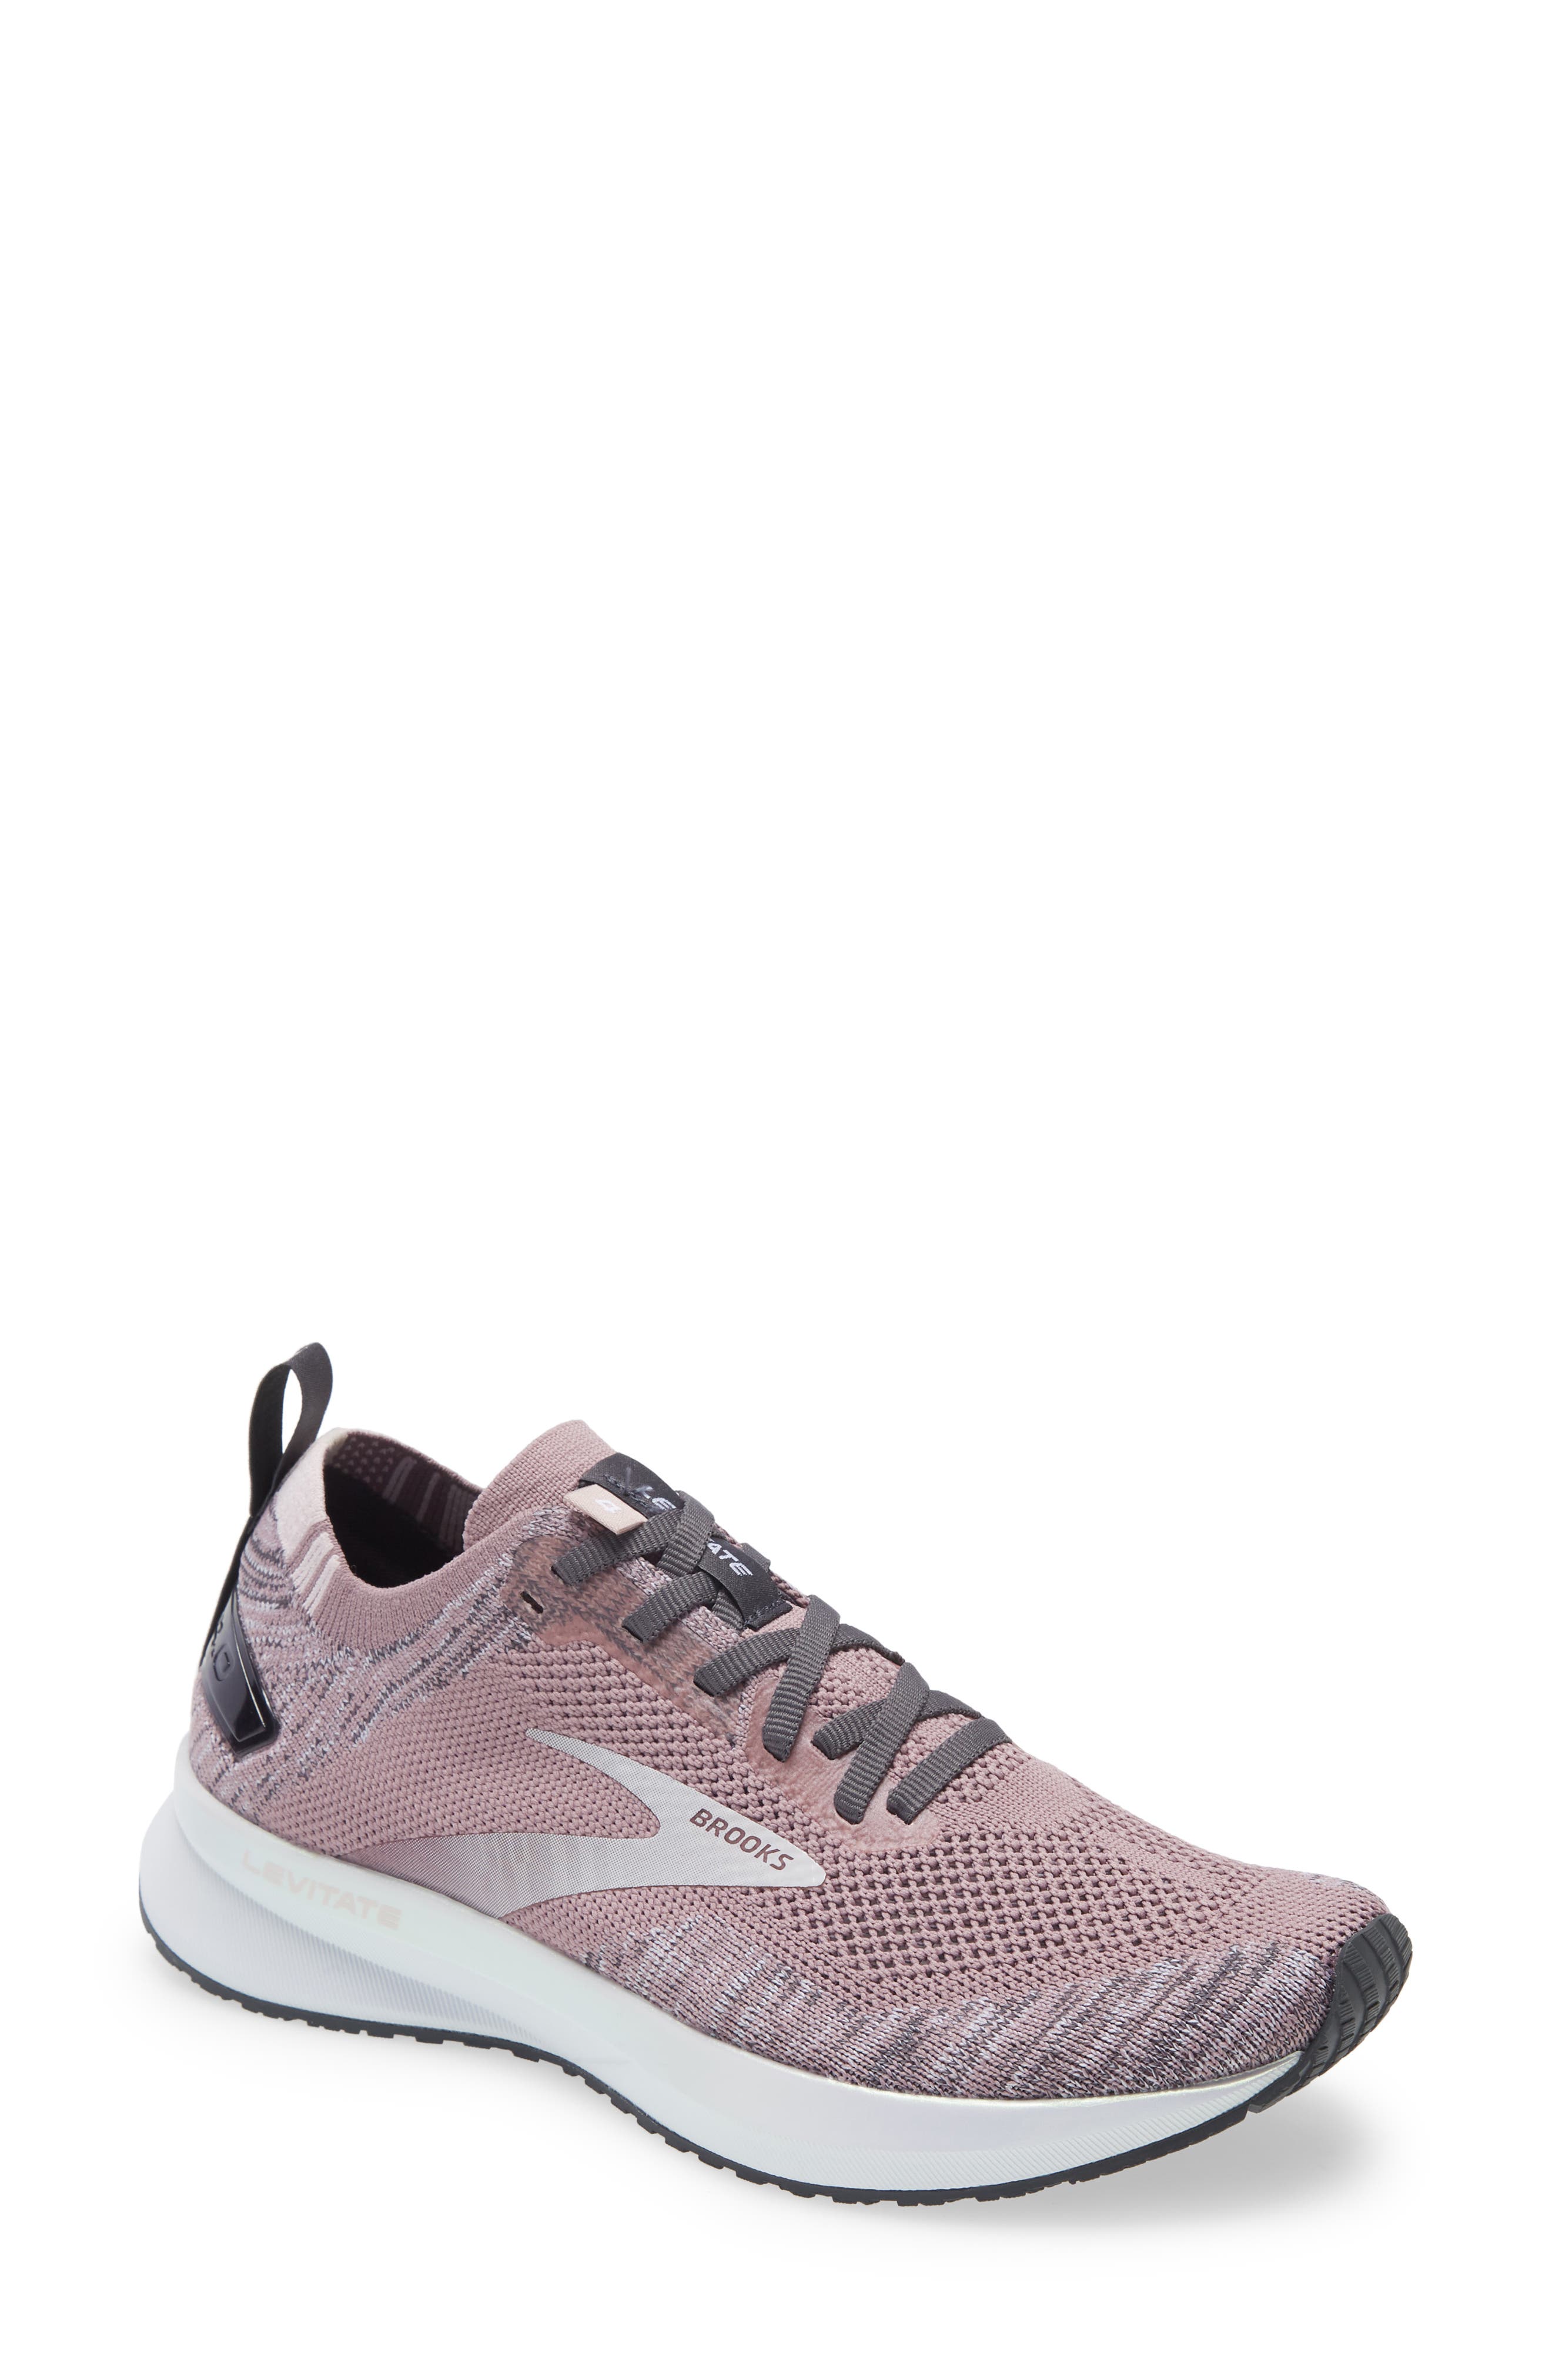 2e womens athletic shoes